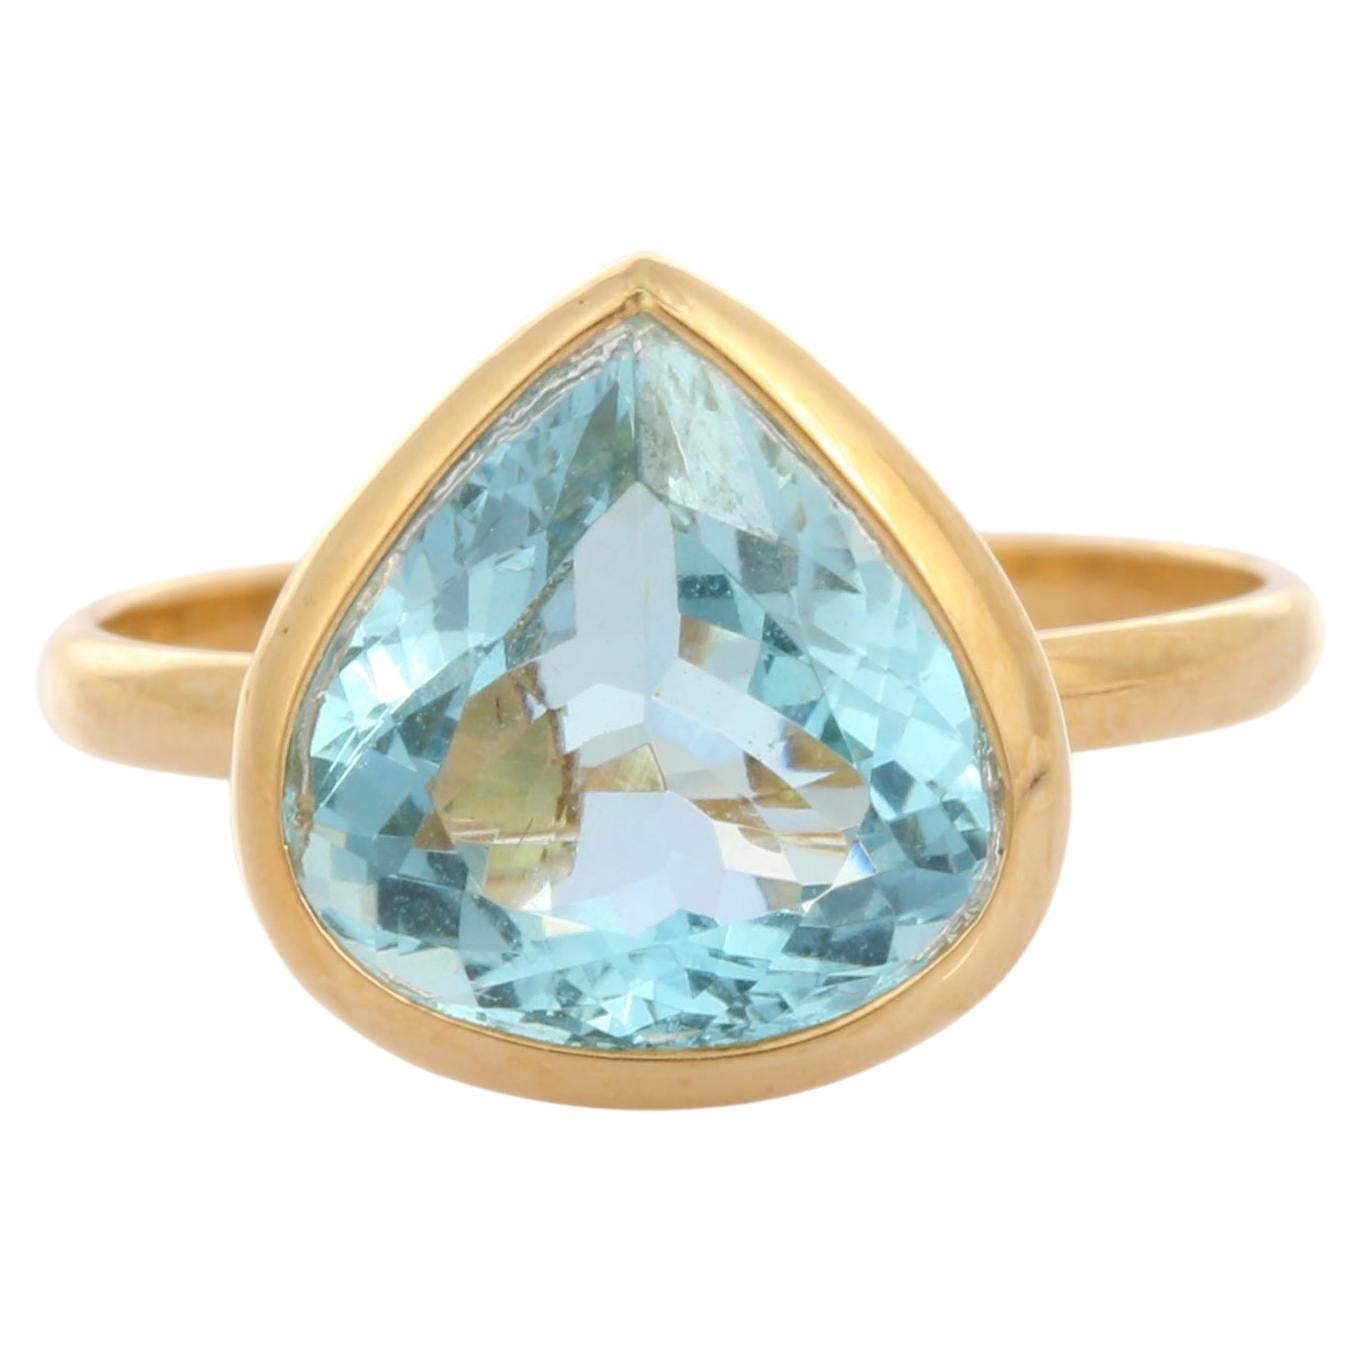 For Sale:  18K Yellow Gold Pear Cut Aquamarine Solitaire Ring